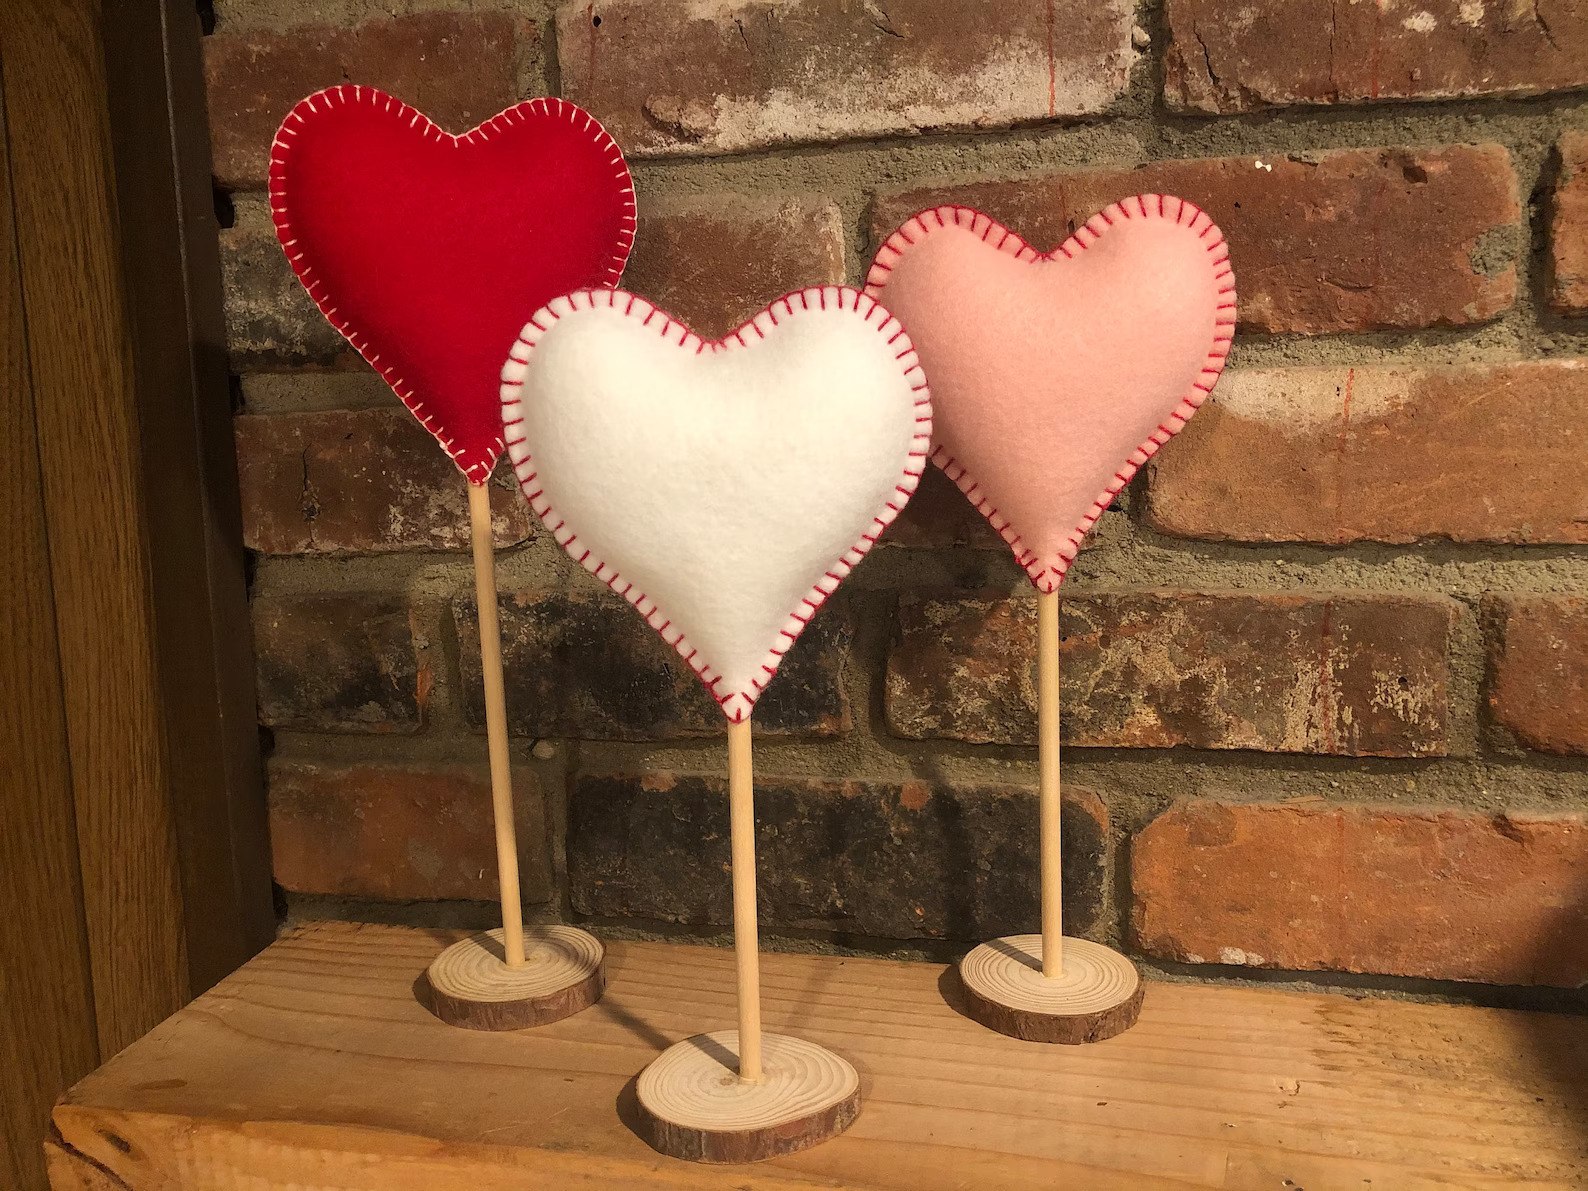 18 Creative Valentine's Day Decorations for Last Minute Touches